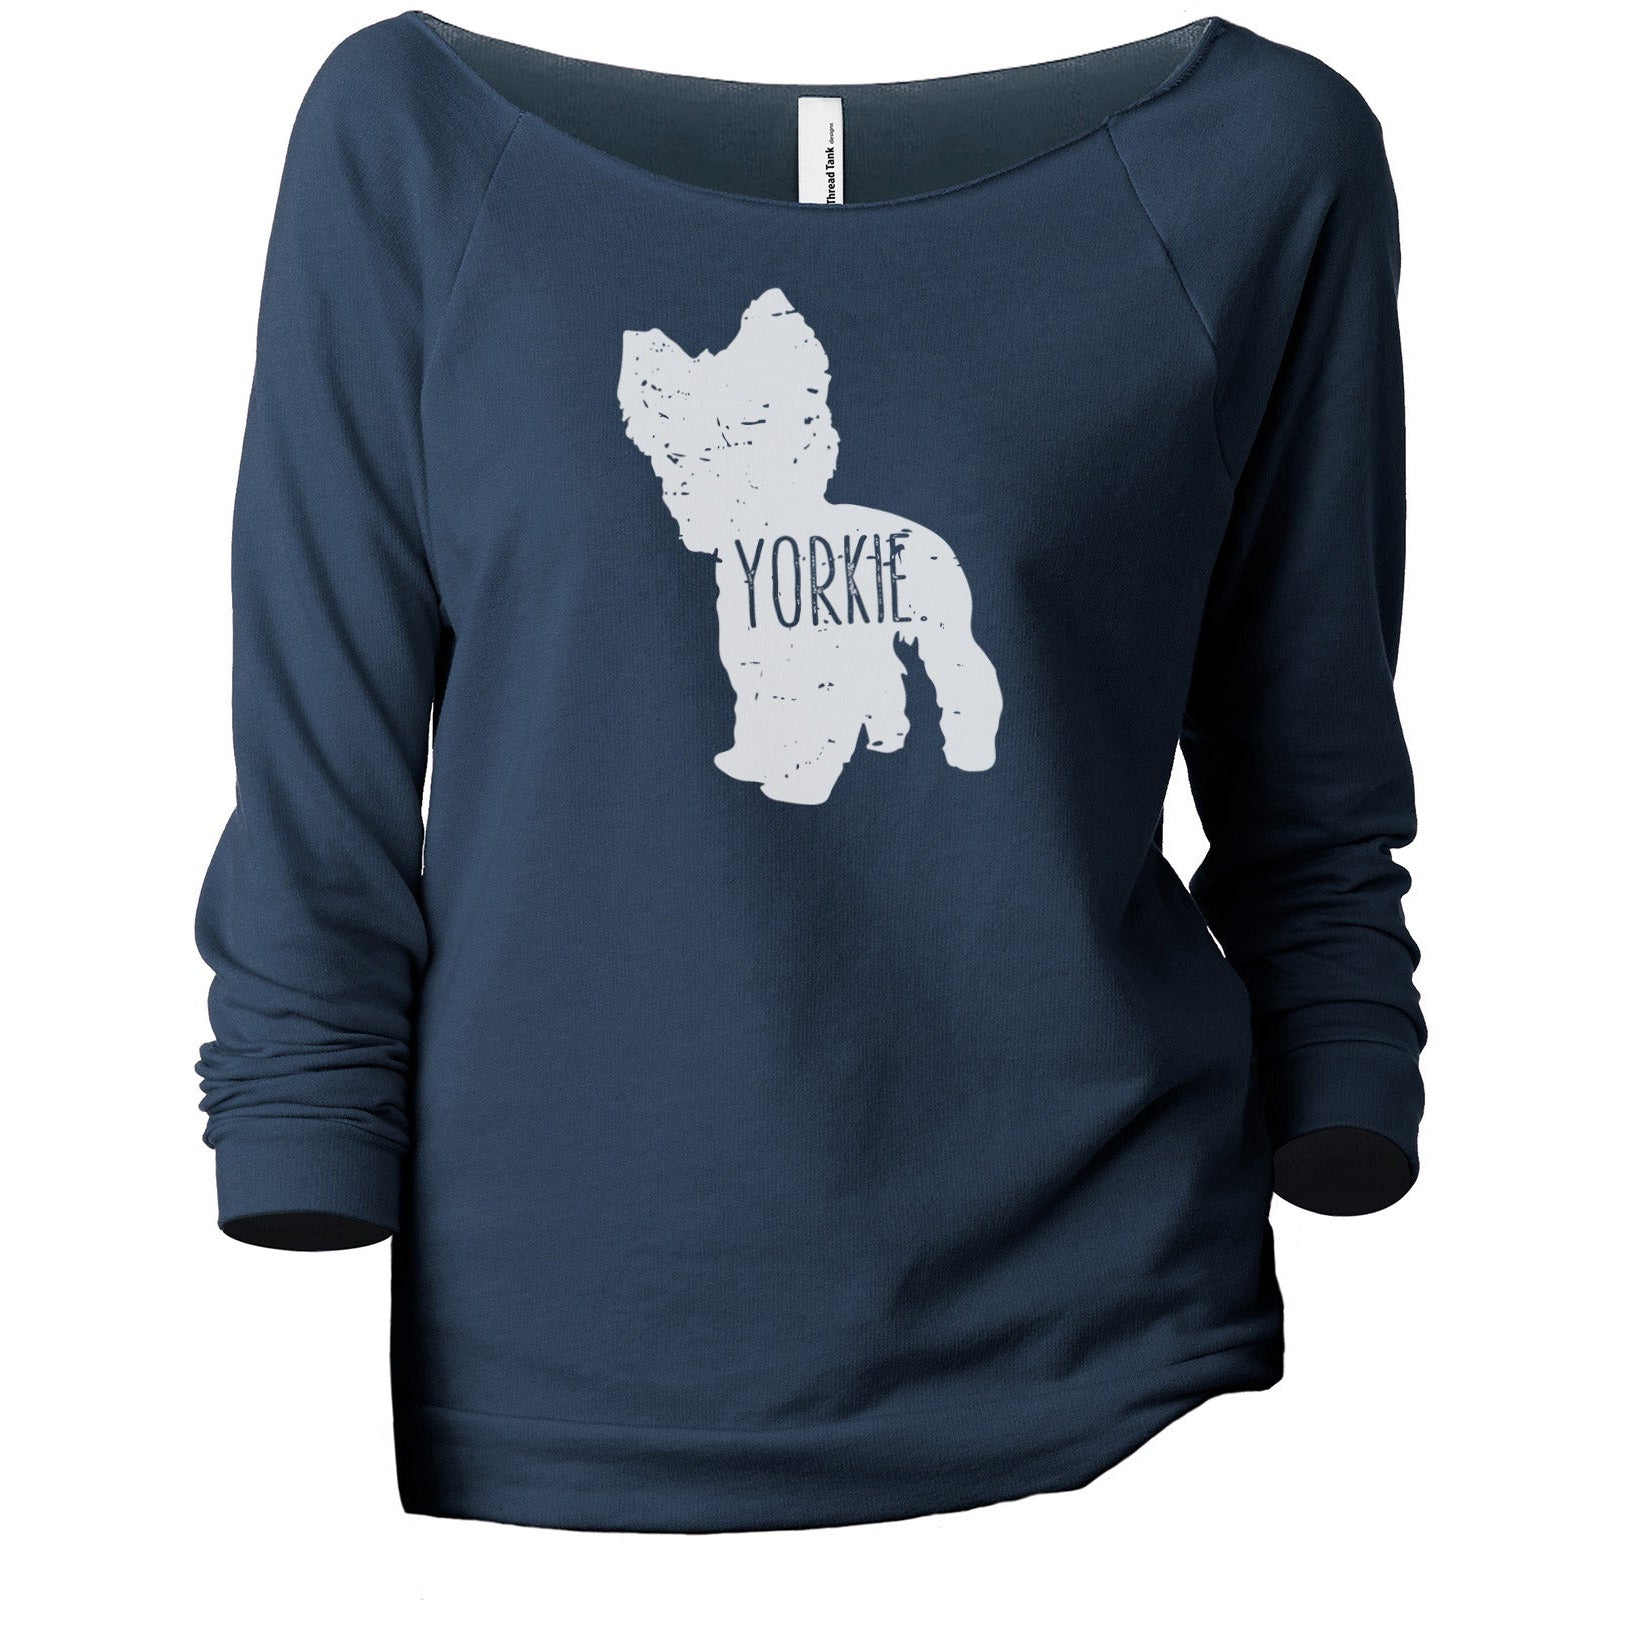 Yorkie Dog Silhouette - Stories You Can Wear